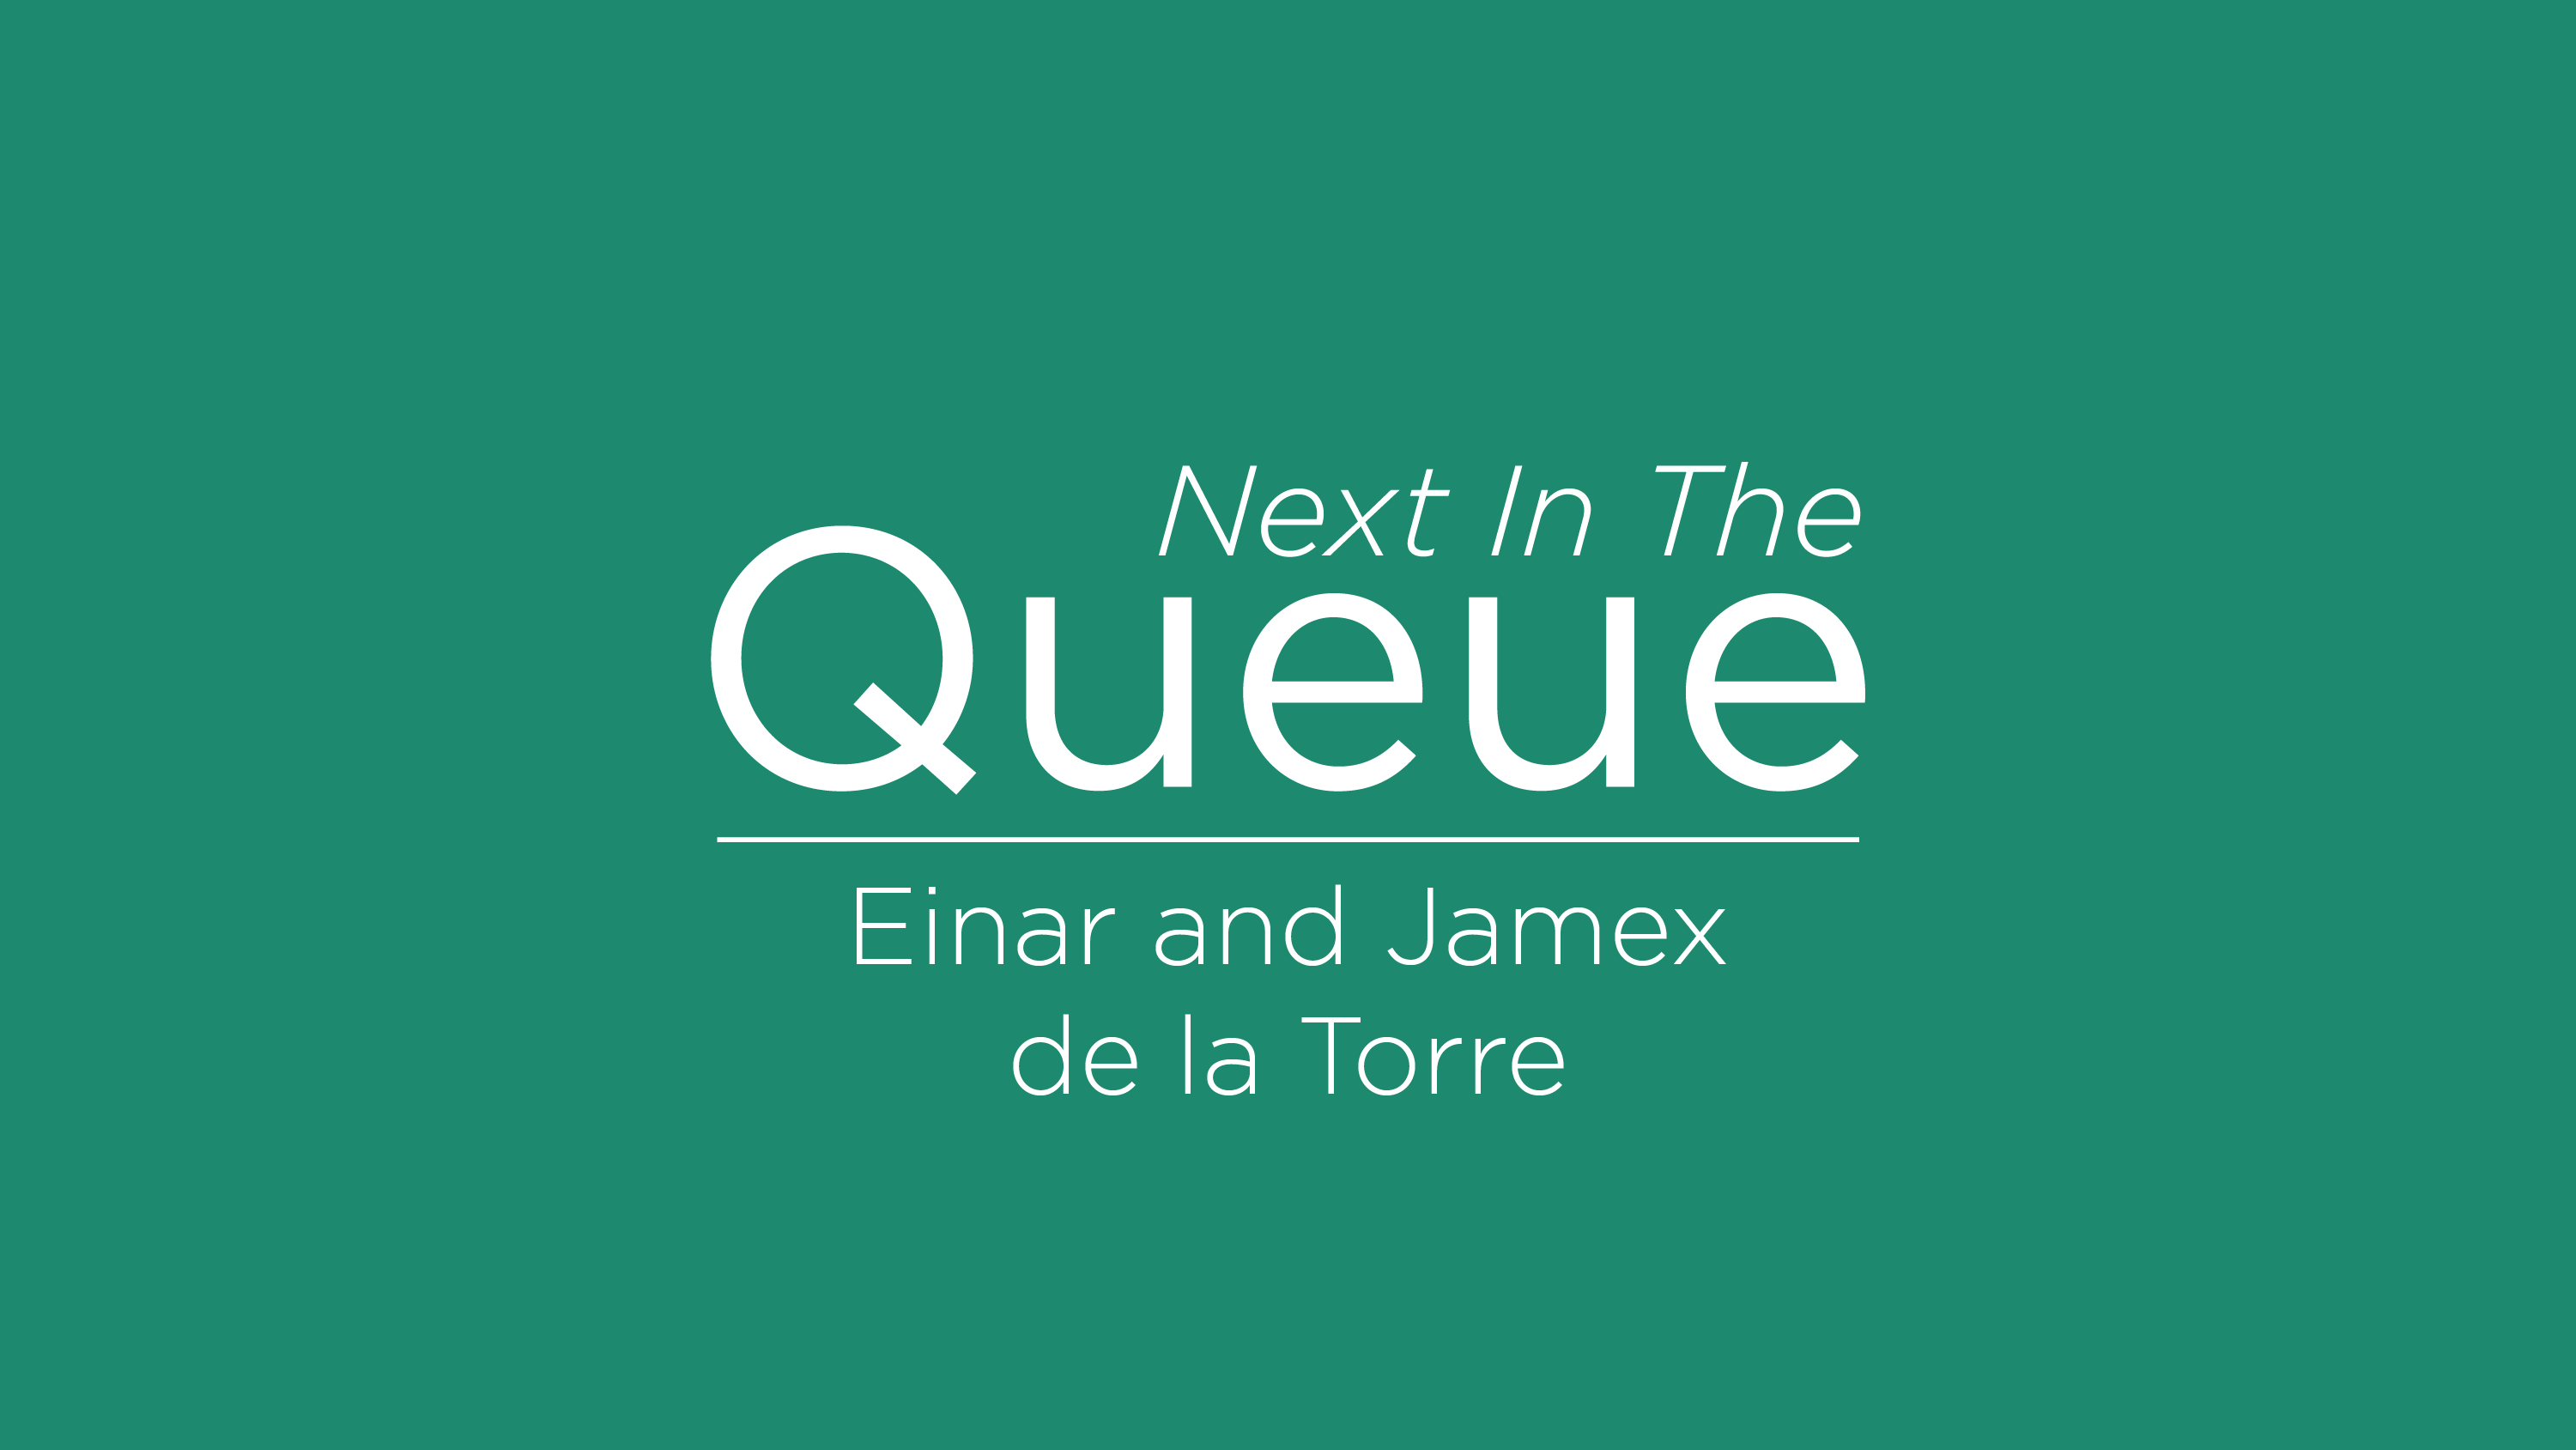 Blog post cover graphic for The Queue featuring Einar and Jamex de la Torre